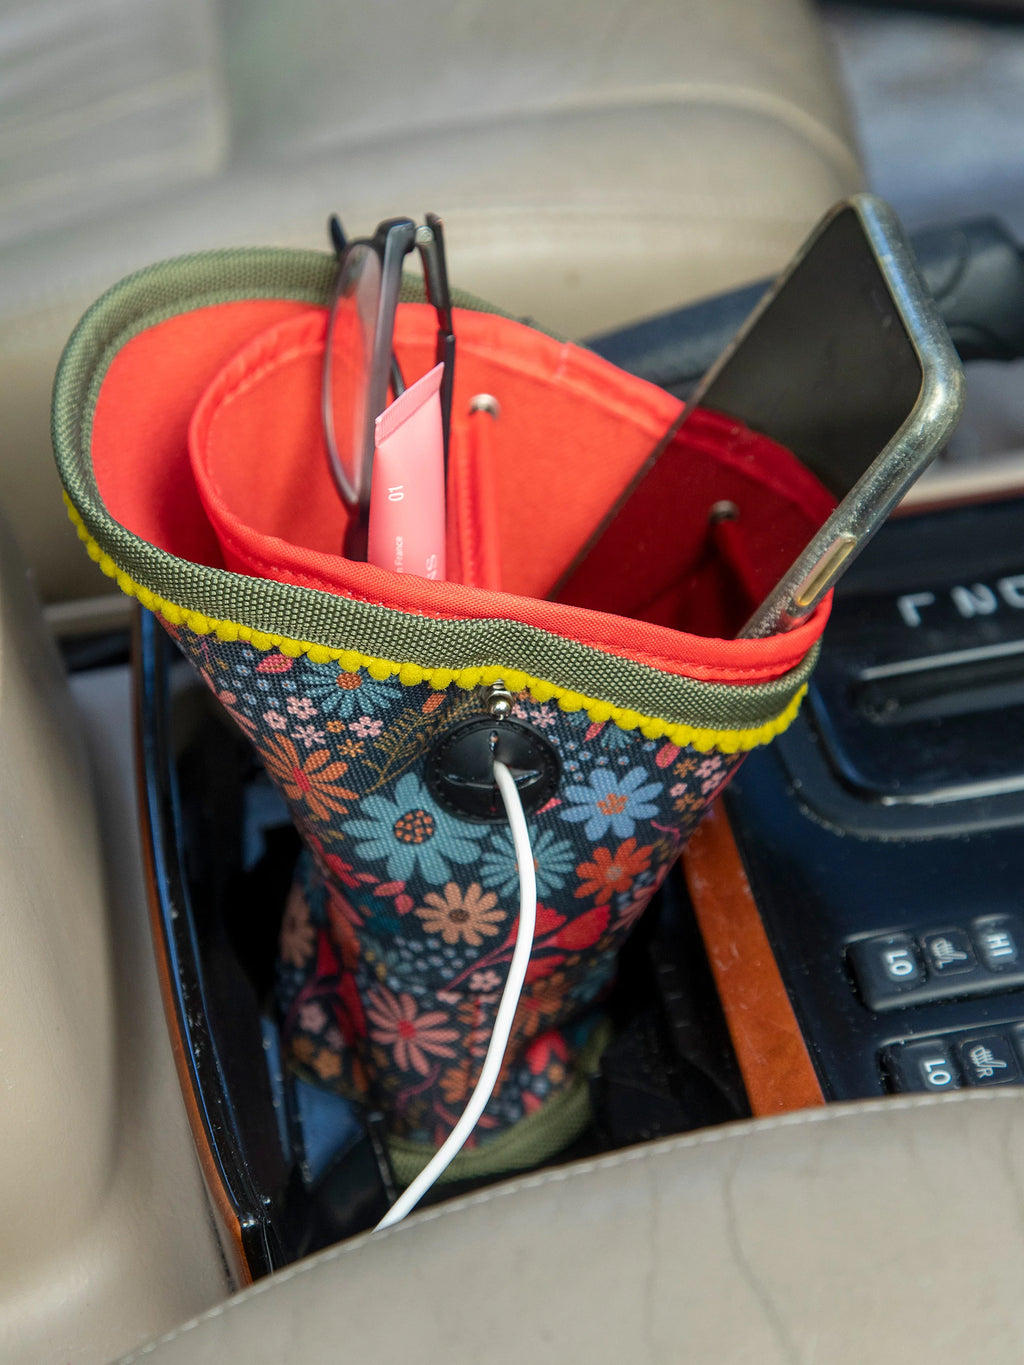 Car Cup Holder Organizer by Natural Life